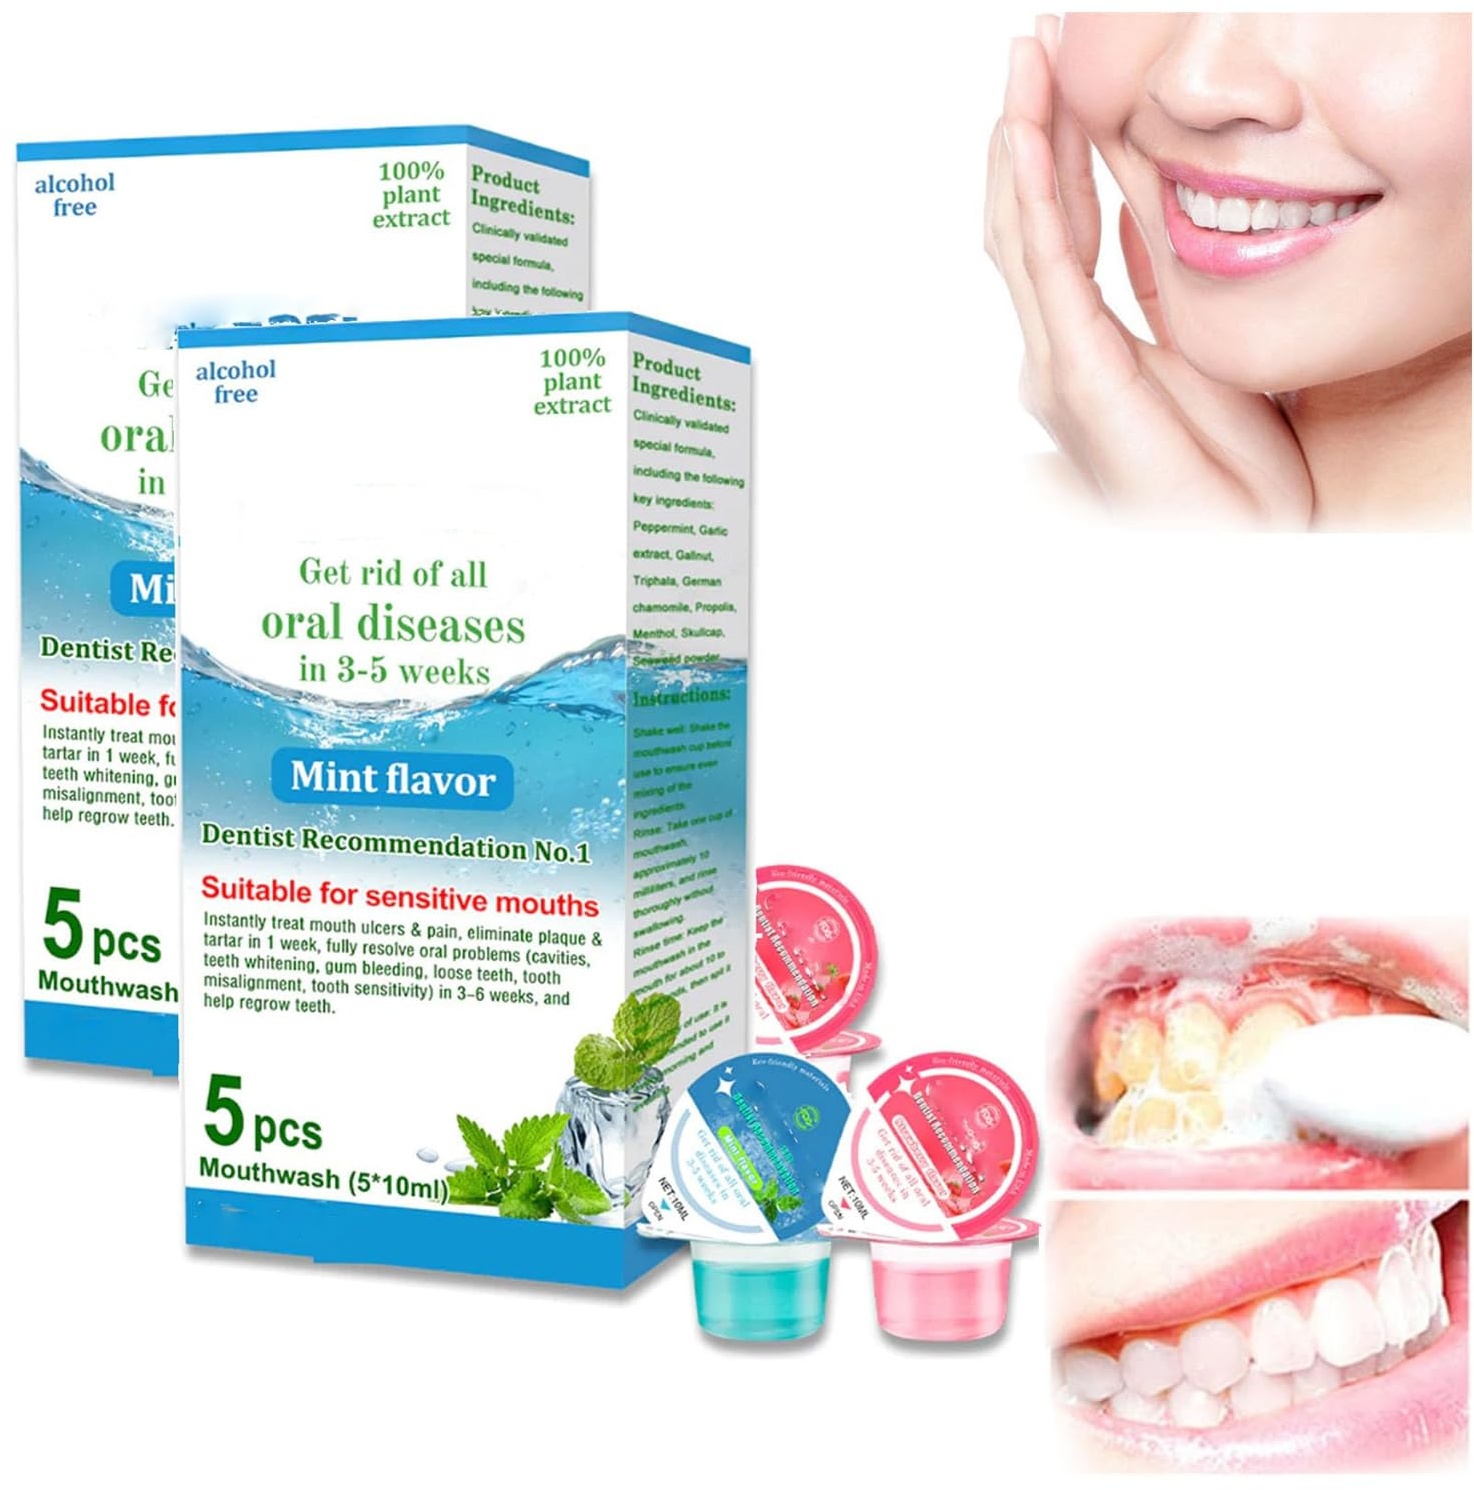 1/2/3 Box OralHeal Jelly Cup Mundspülung Restoring Tear and Mouth to Health, Clear Bad Breath and Clean Teeth (2 Box/10 Stück)